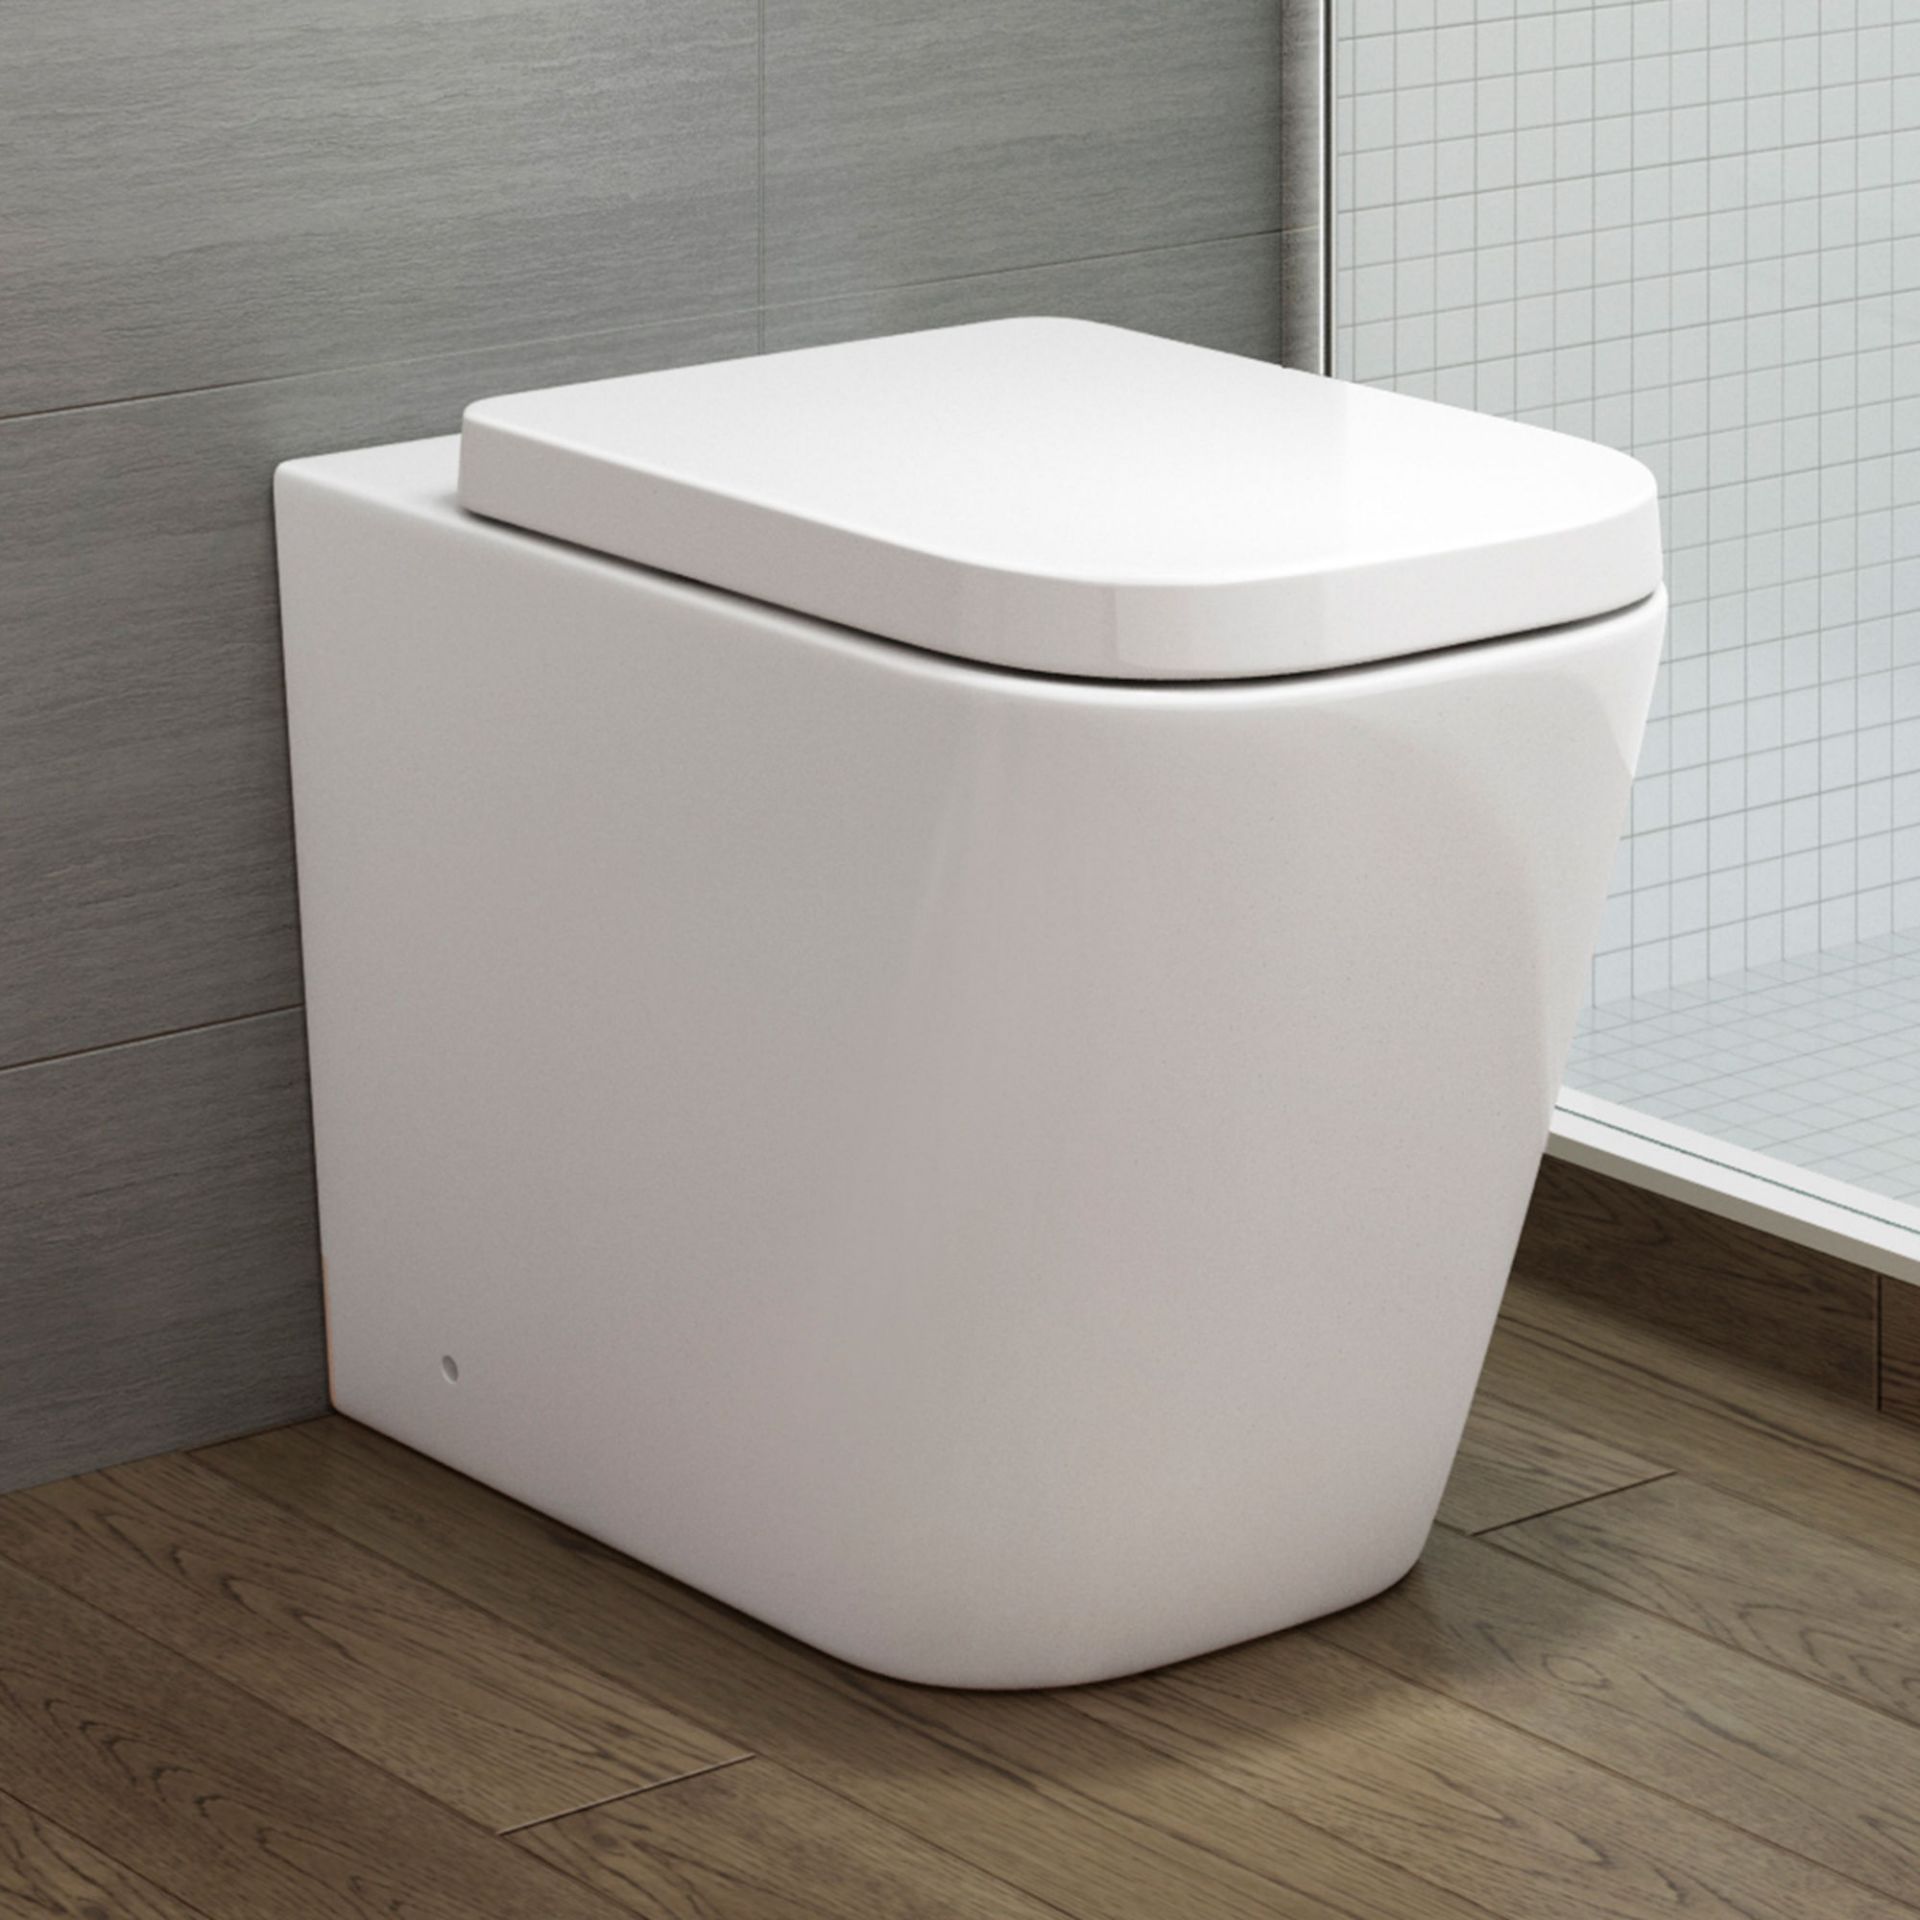 New Boxed 1200mm Alexis White Gloss Left Hand Vanity Unit Florence Back To Wall Pan. RRP £999.99. - Image 3 of 3